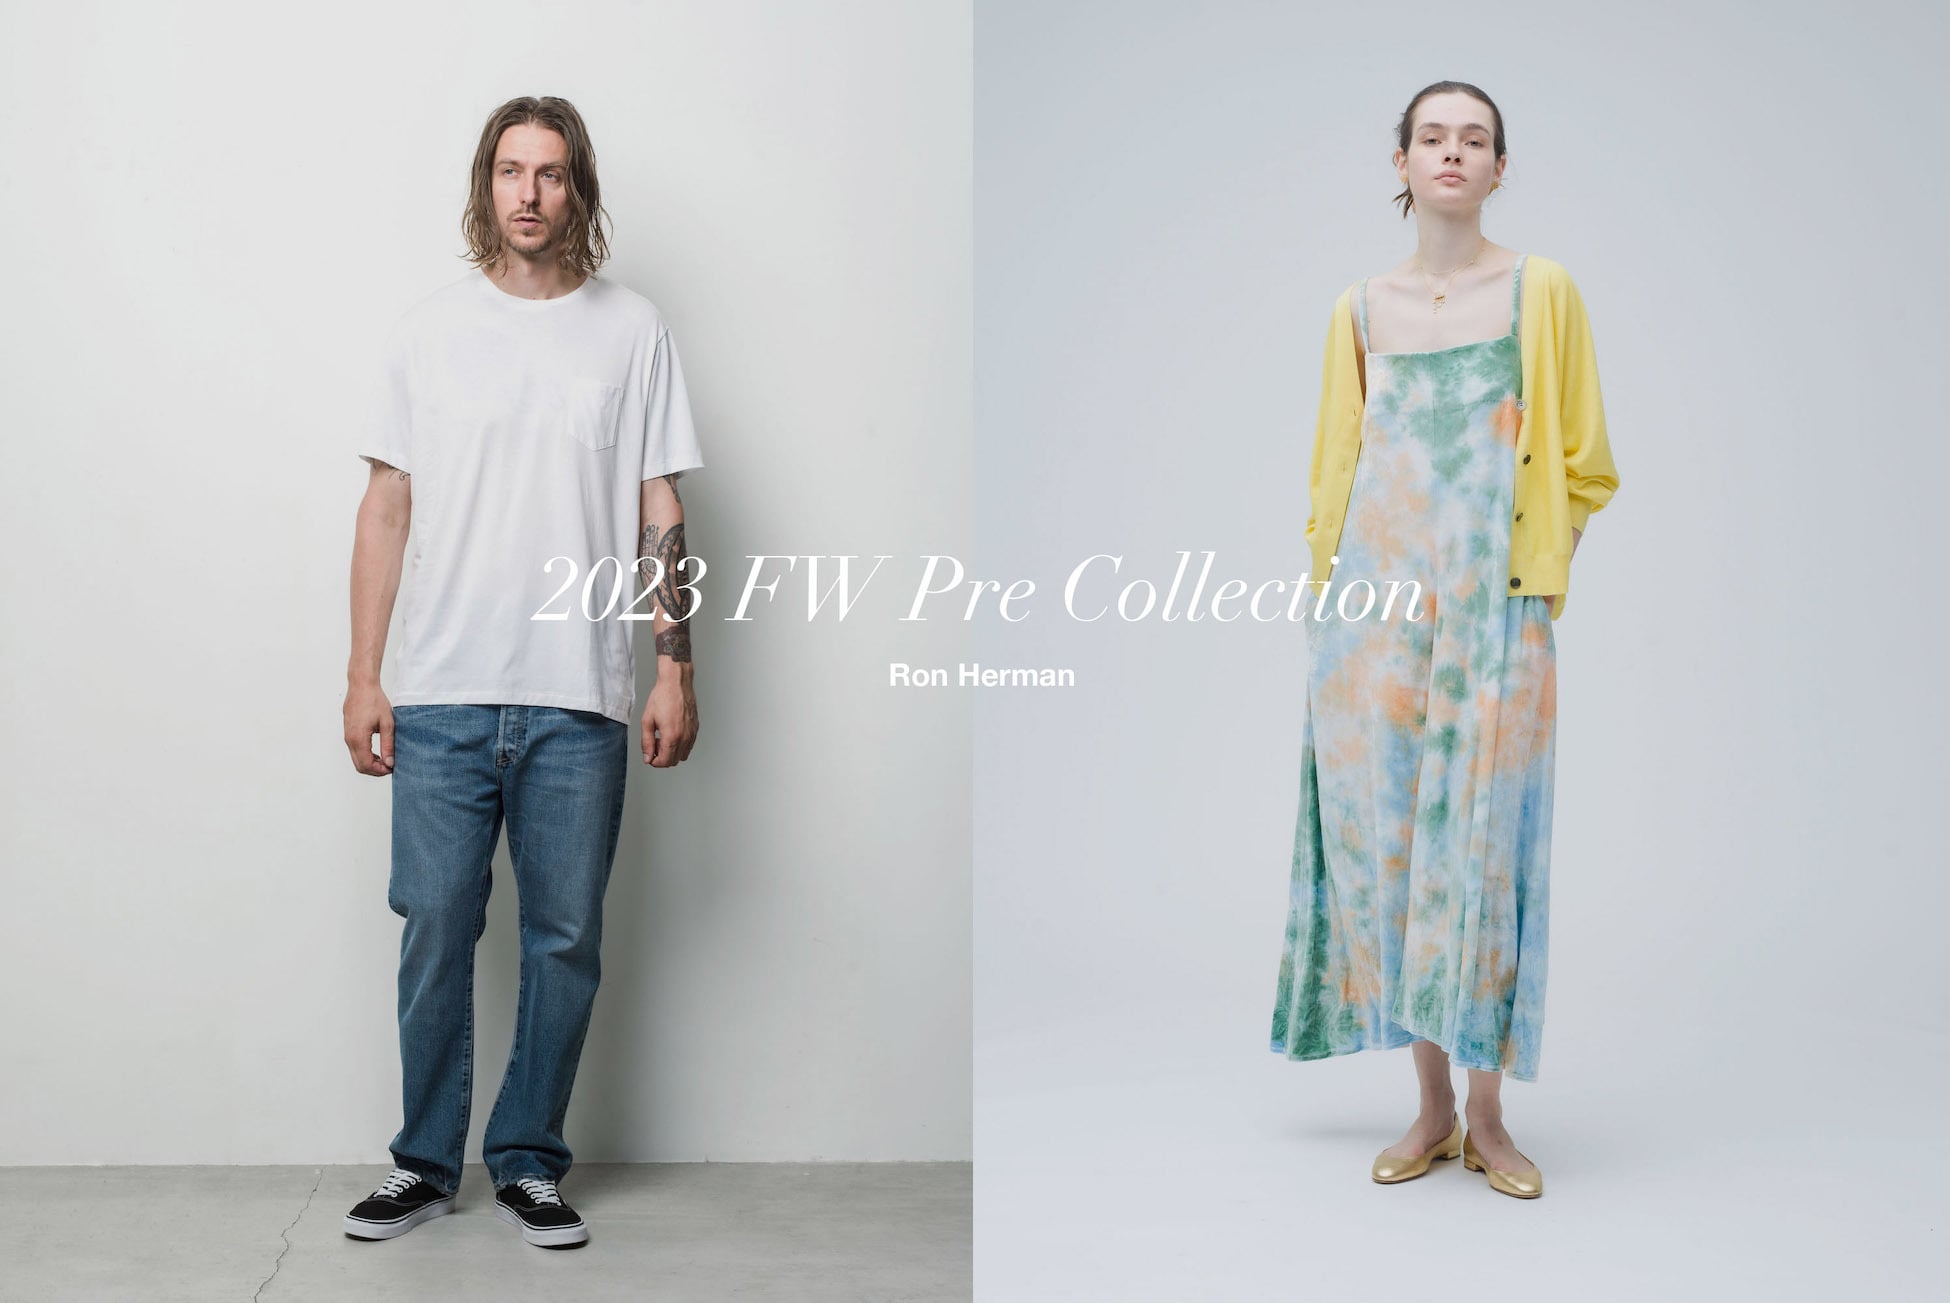 2023 FW Pre Collection